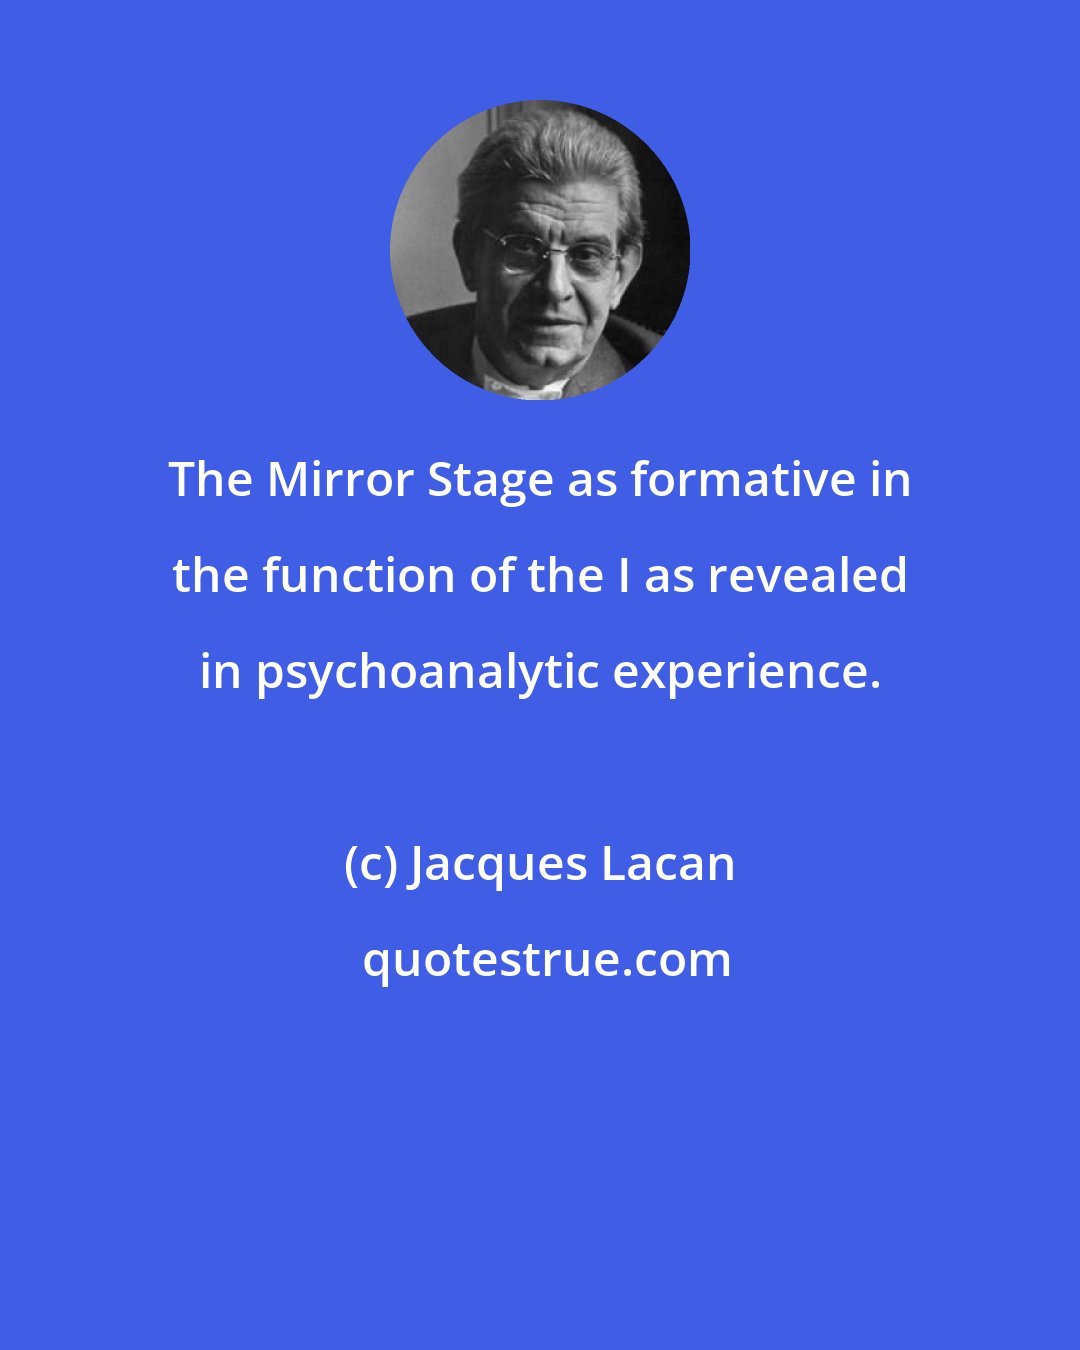 Jacques Lacan: The Mirror Stage as formative in the function of the I as revealed in psychoanalytic experience.